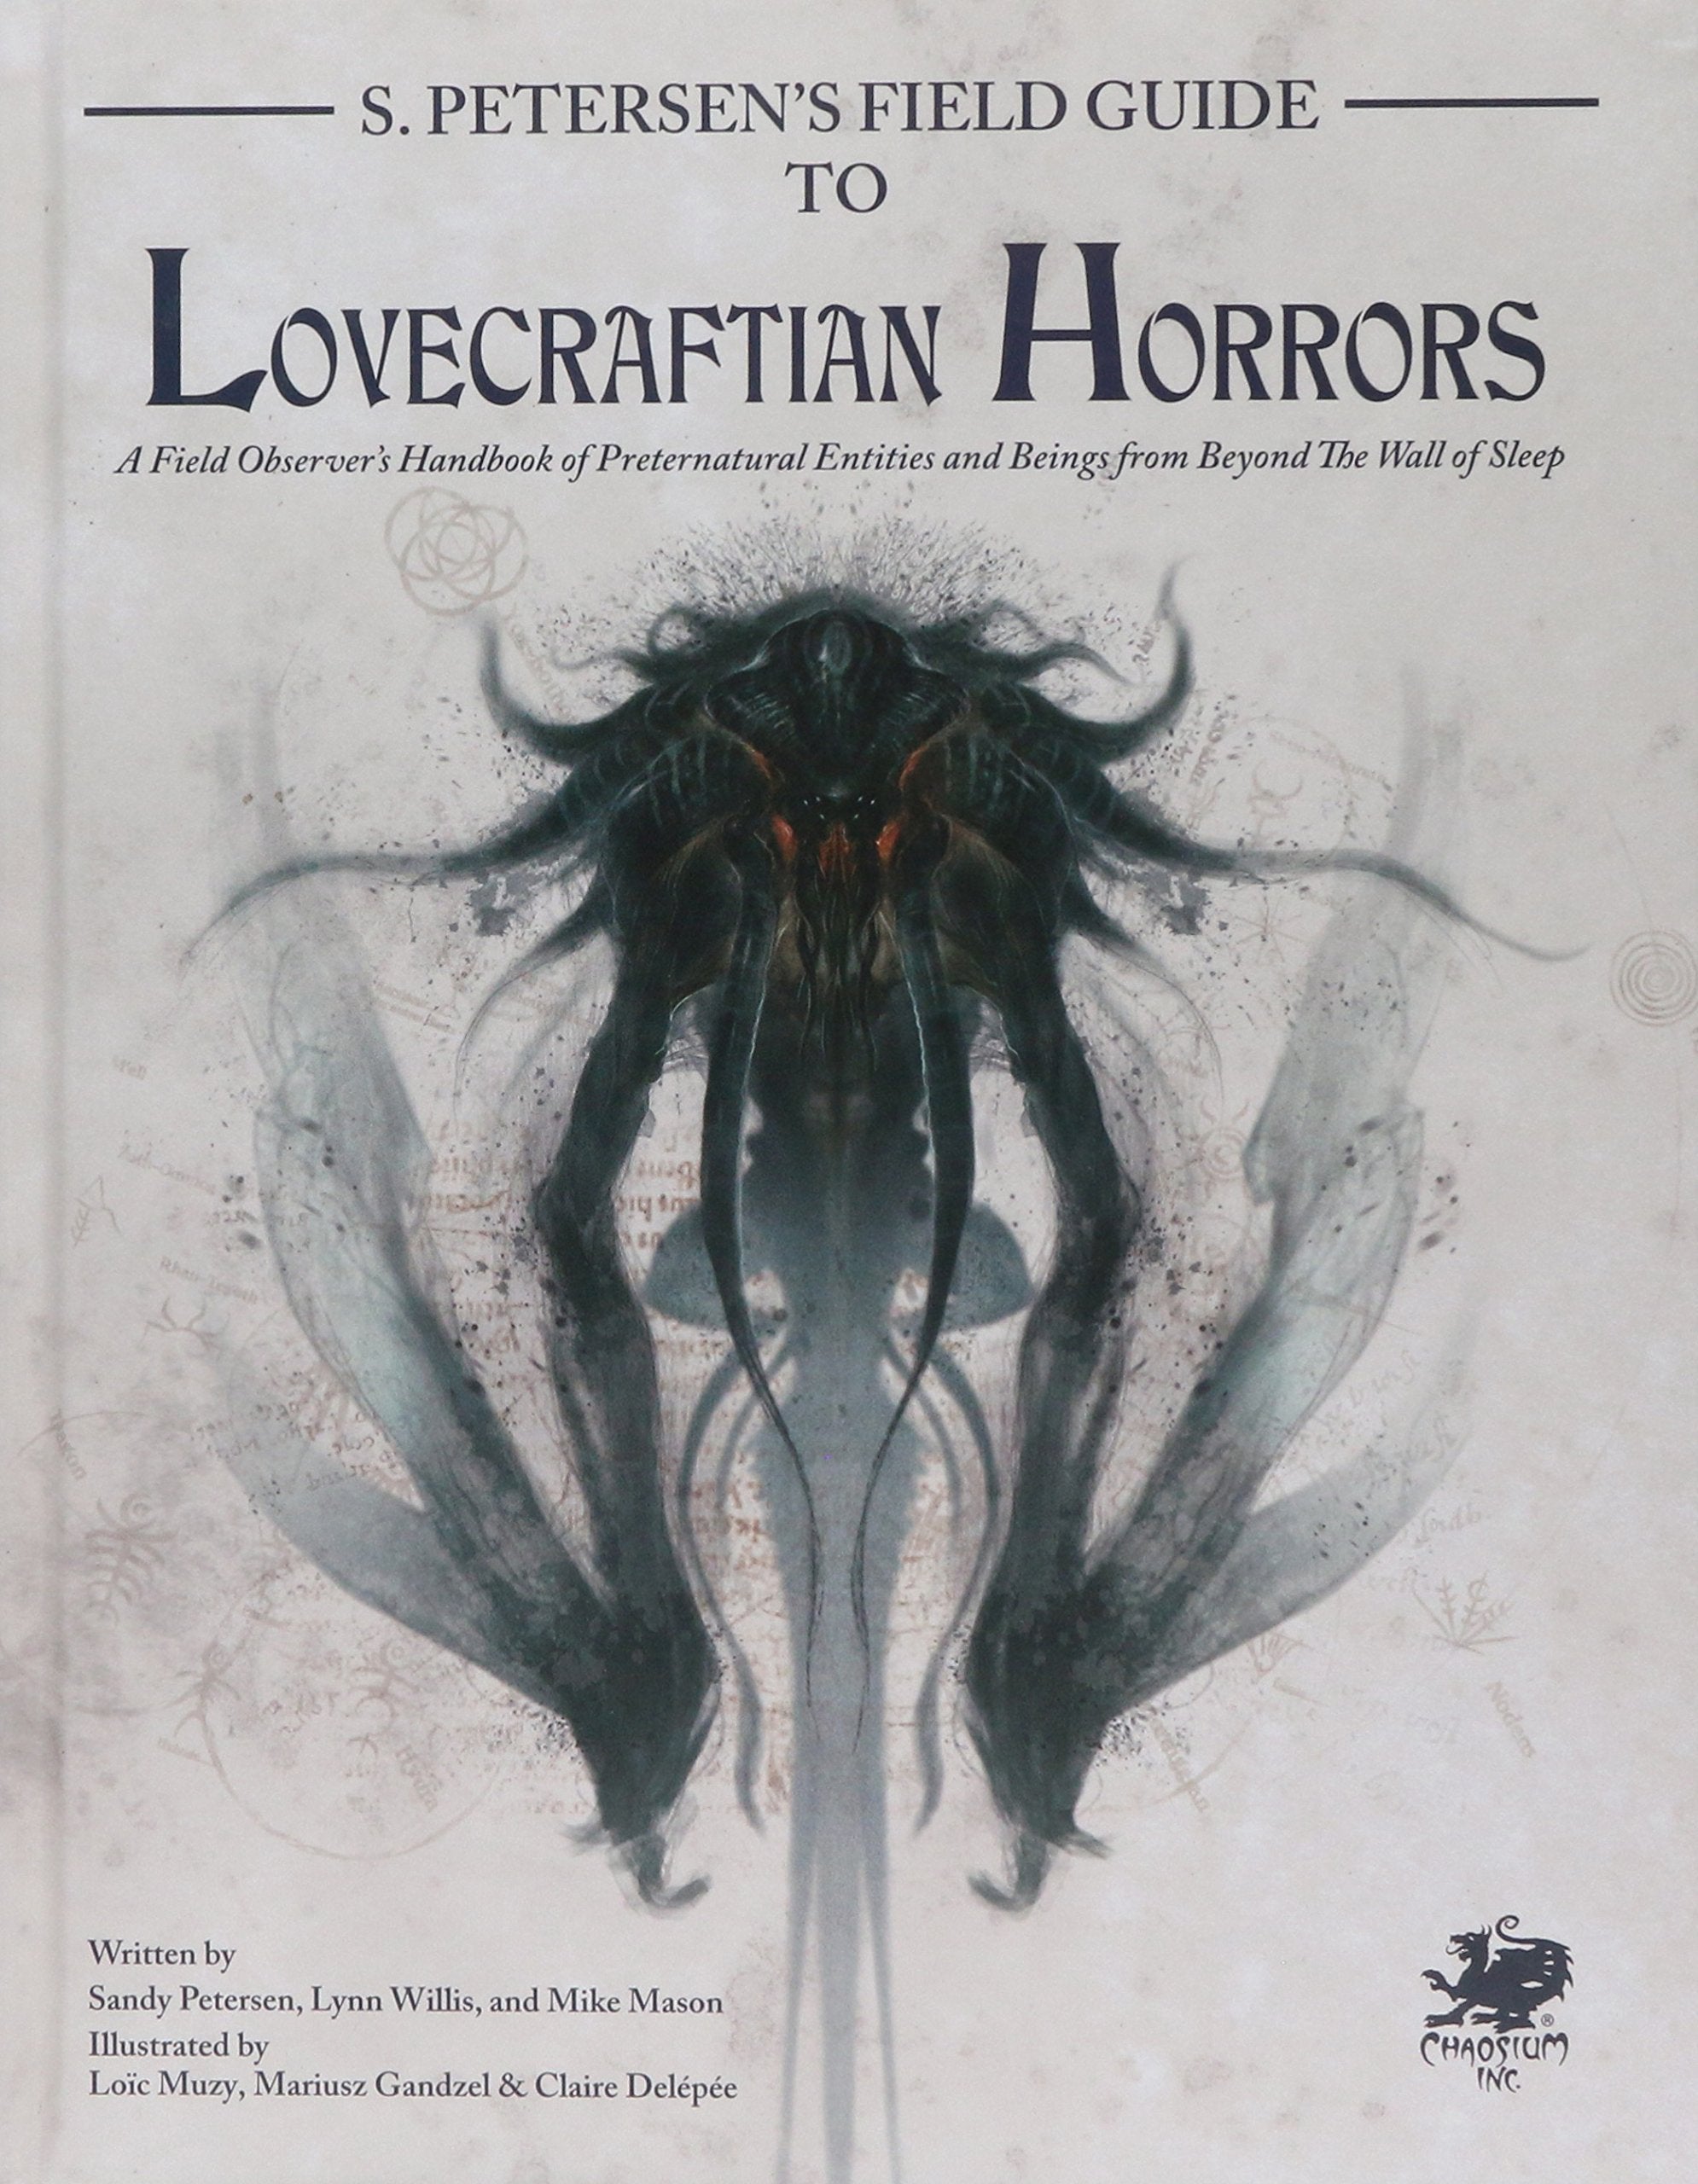 S.Petersen's Field Guide to Lovecraftian Horrors